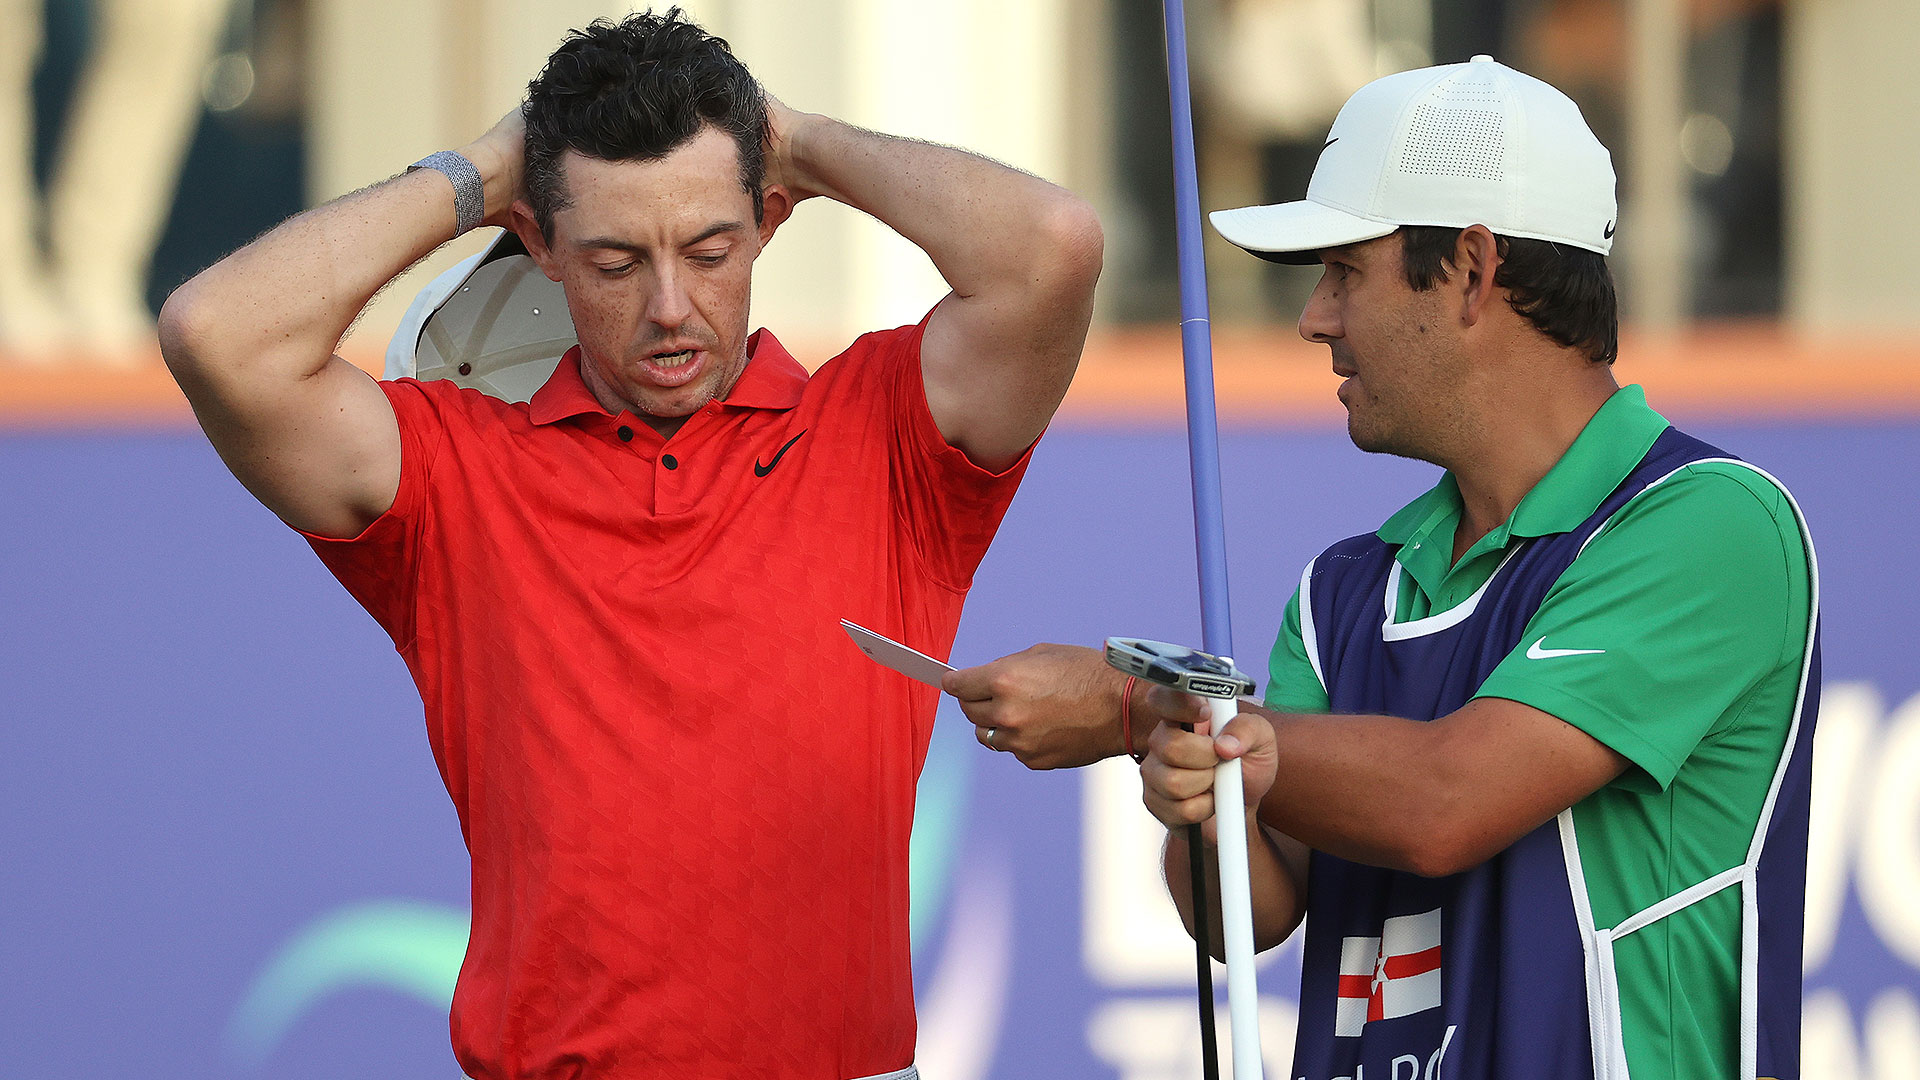 Watch: Rory McIlroy avoids prior mistake alongside Tiger Woods, saves bogey off the rocks